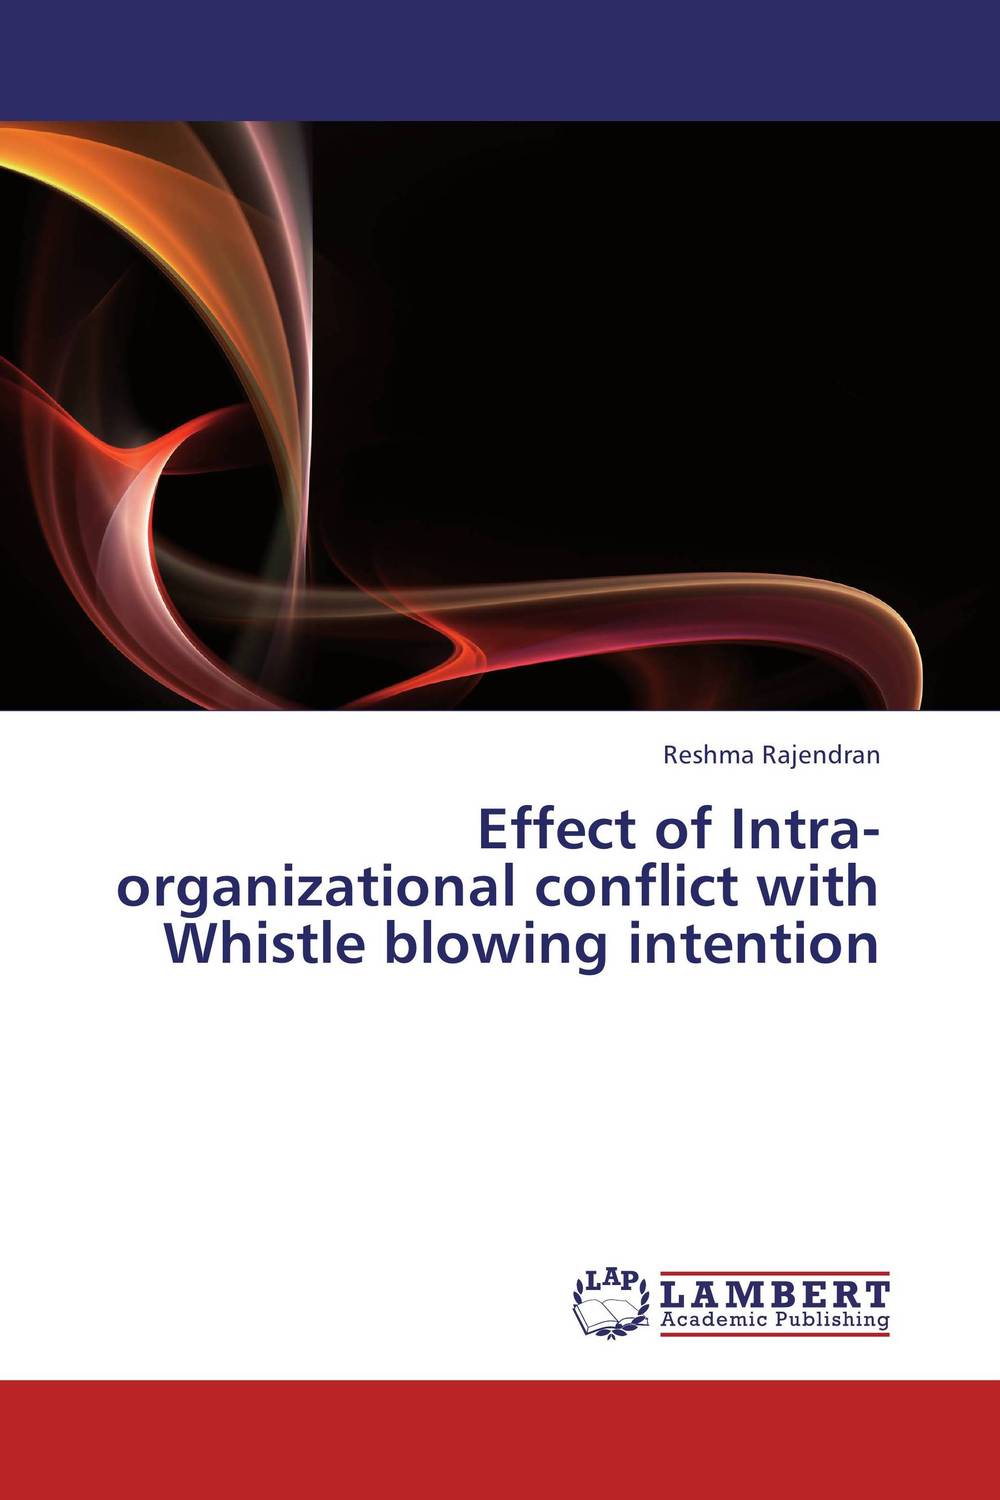 Effect of Intra-organizational conflict with Whistle blowing intention